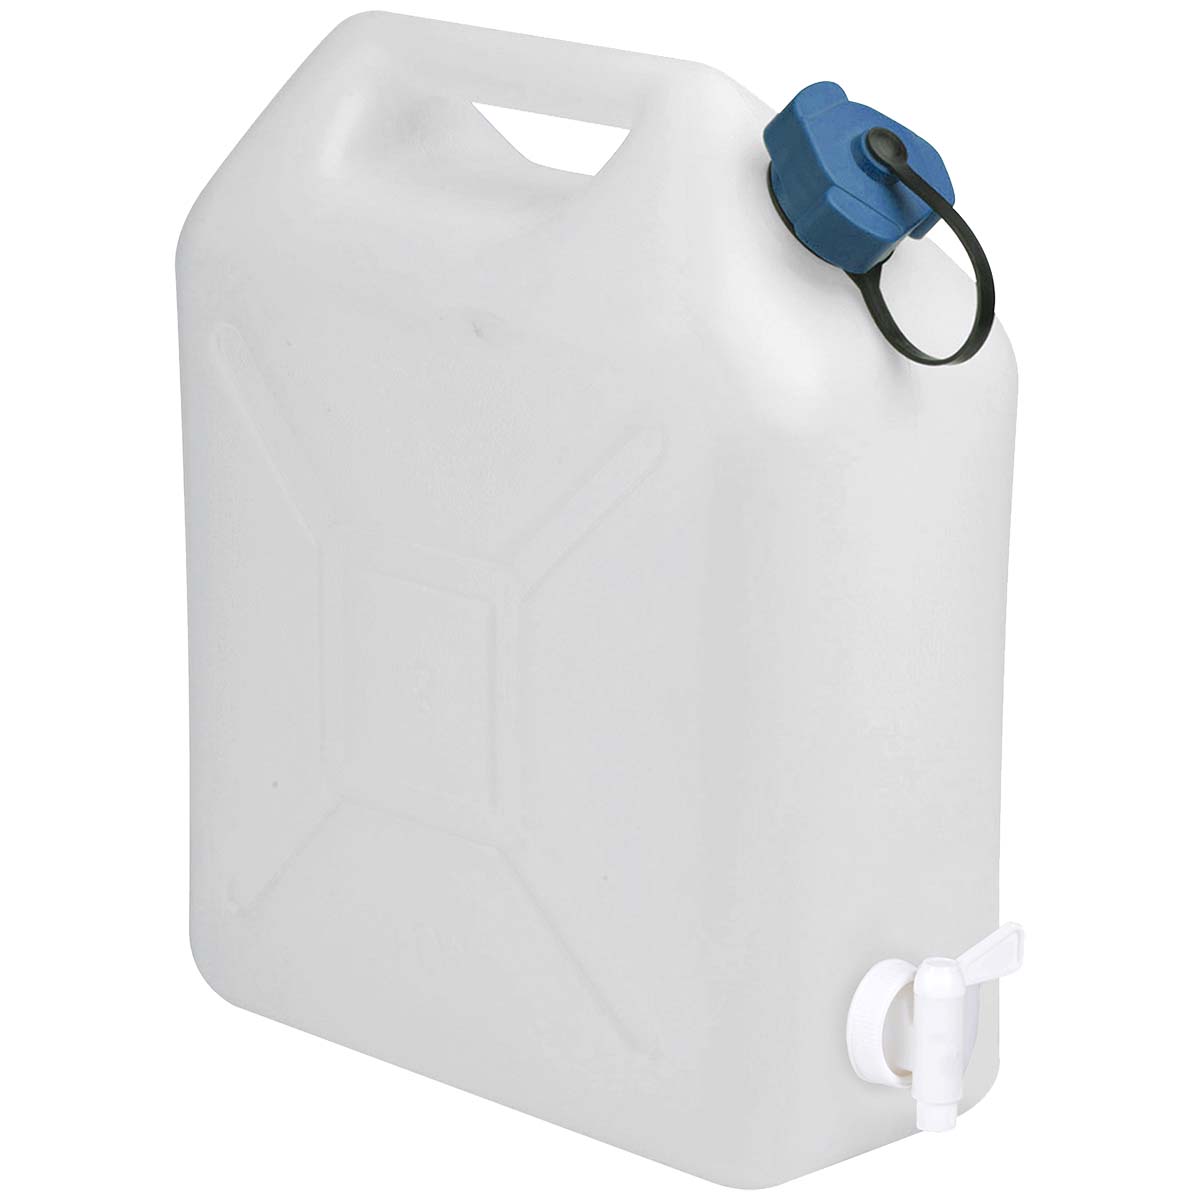 6603650 A jerrycan with a tap. With strong walls, a breather cap and a movable tap for pouring.